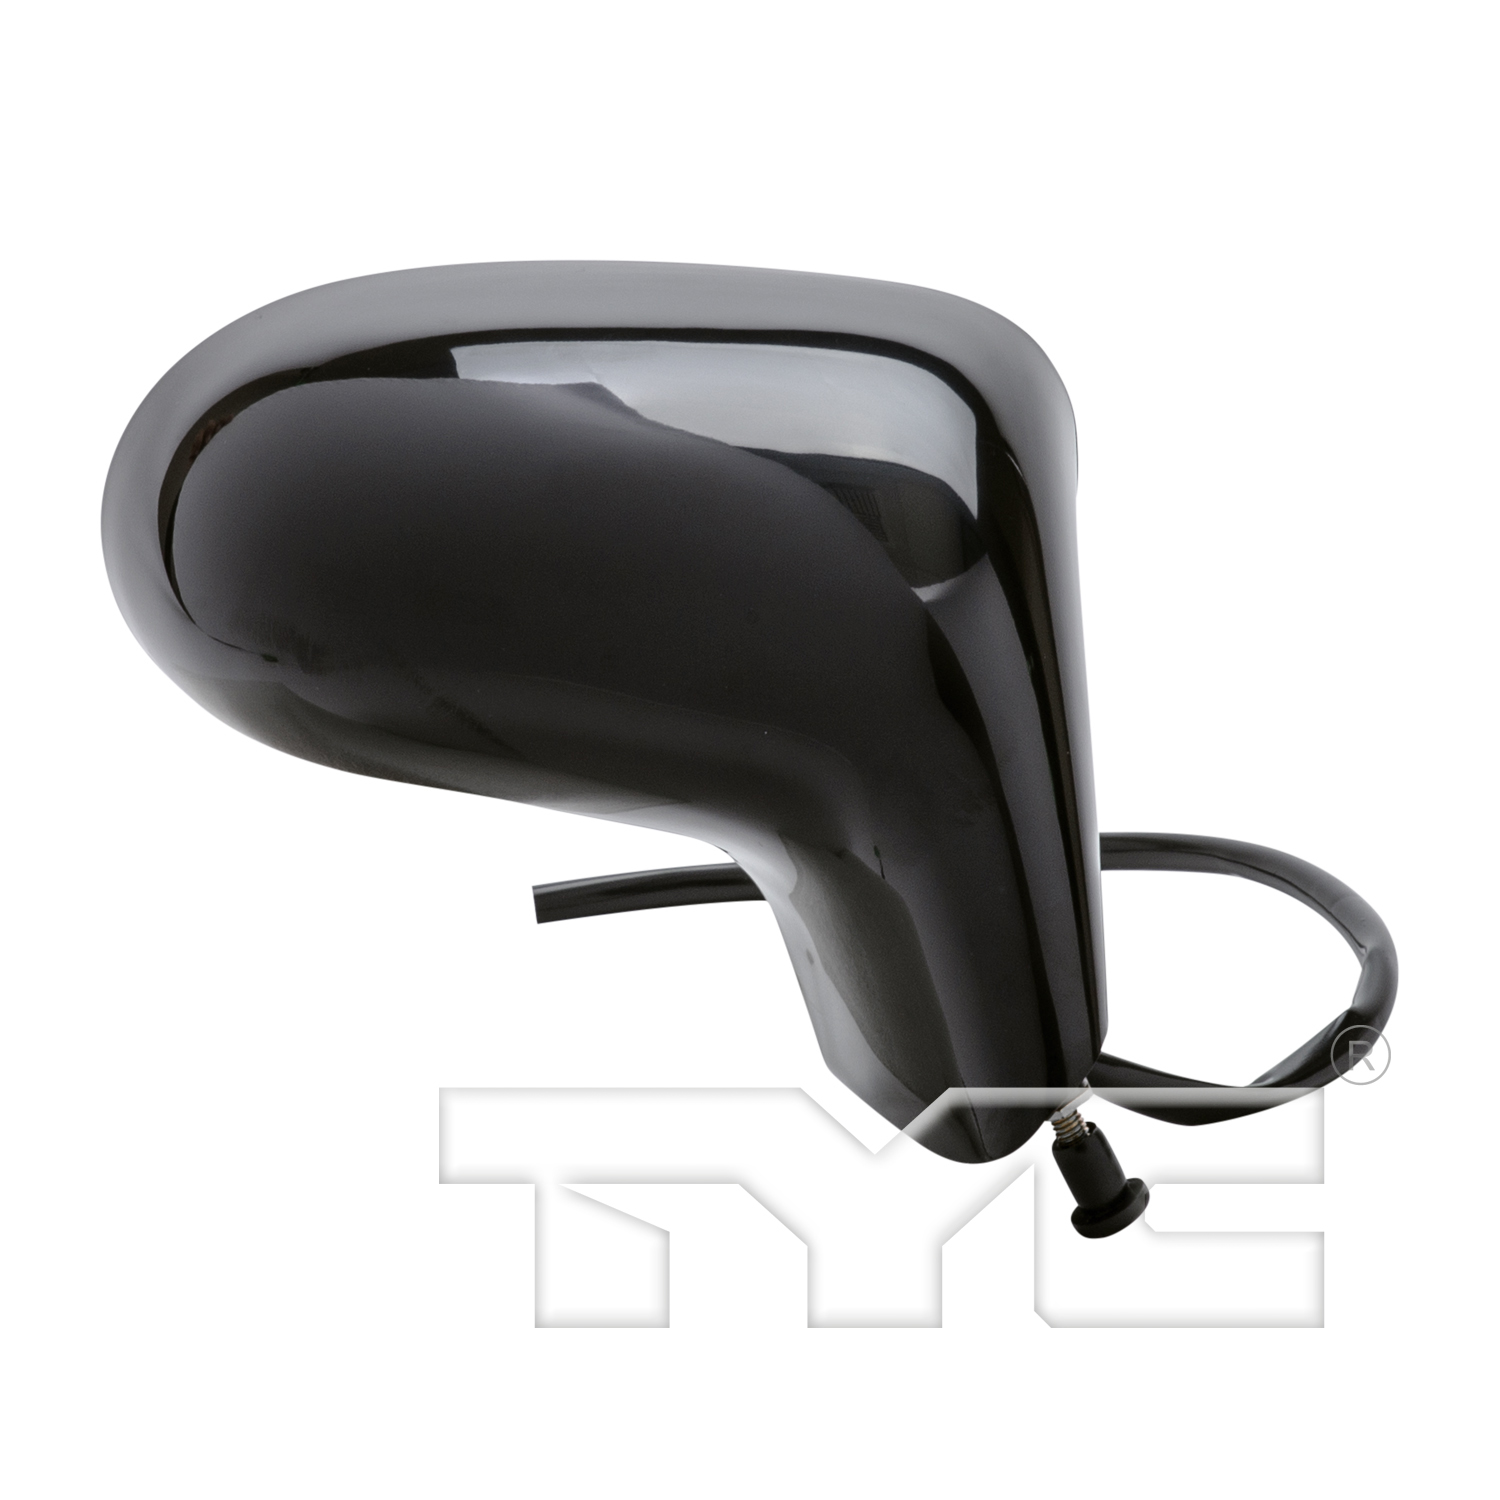 Aftermarket MIRRORS for OLDSMOBILE - 98, LESABRE,92-9,RIGHT HANDSIDE MIRROR POWER